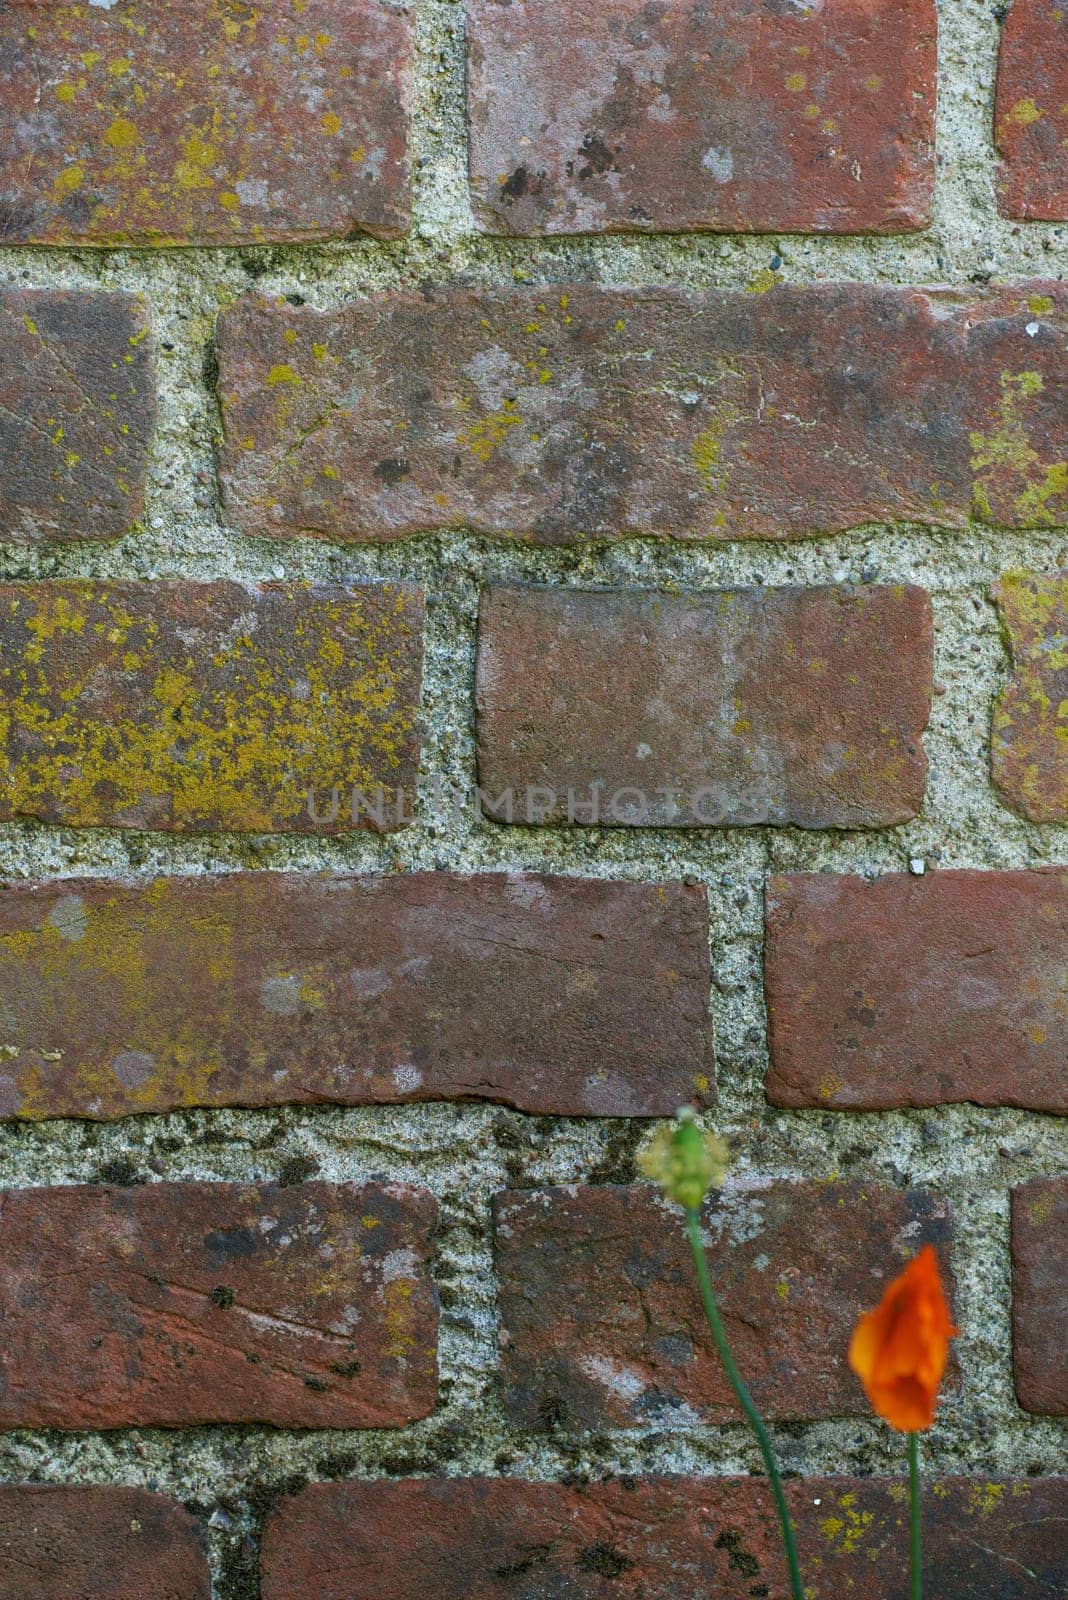 Brick, wall and cement with poppy flower in nature, outside and block with concrete for home build. Masonry, brickwork and weather for outdoor stone architecture, plant or weathered and aged material.